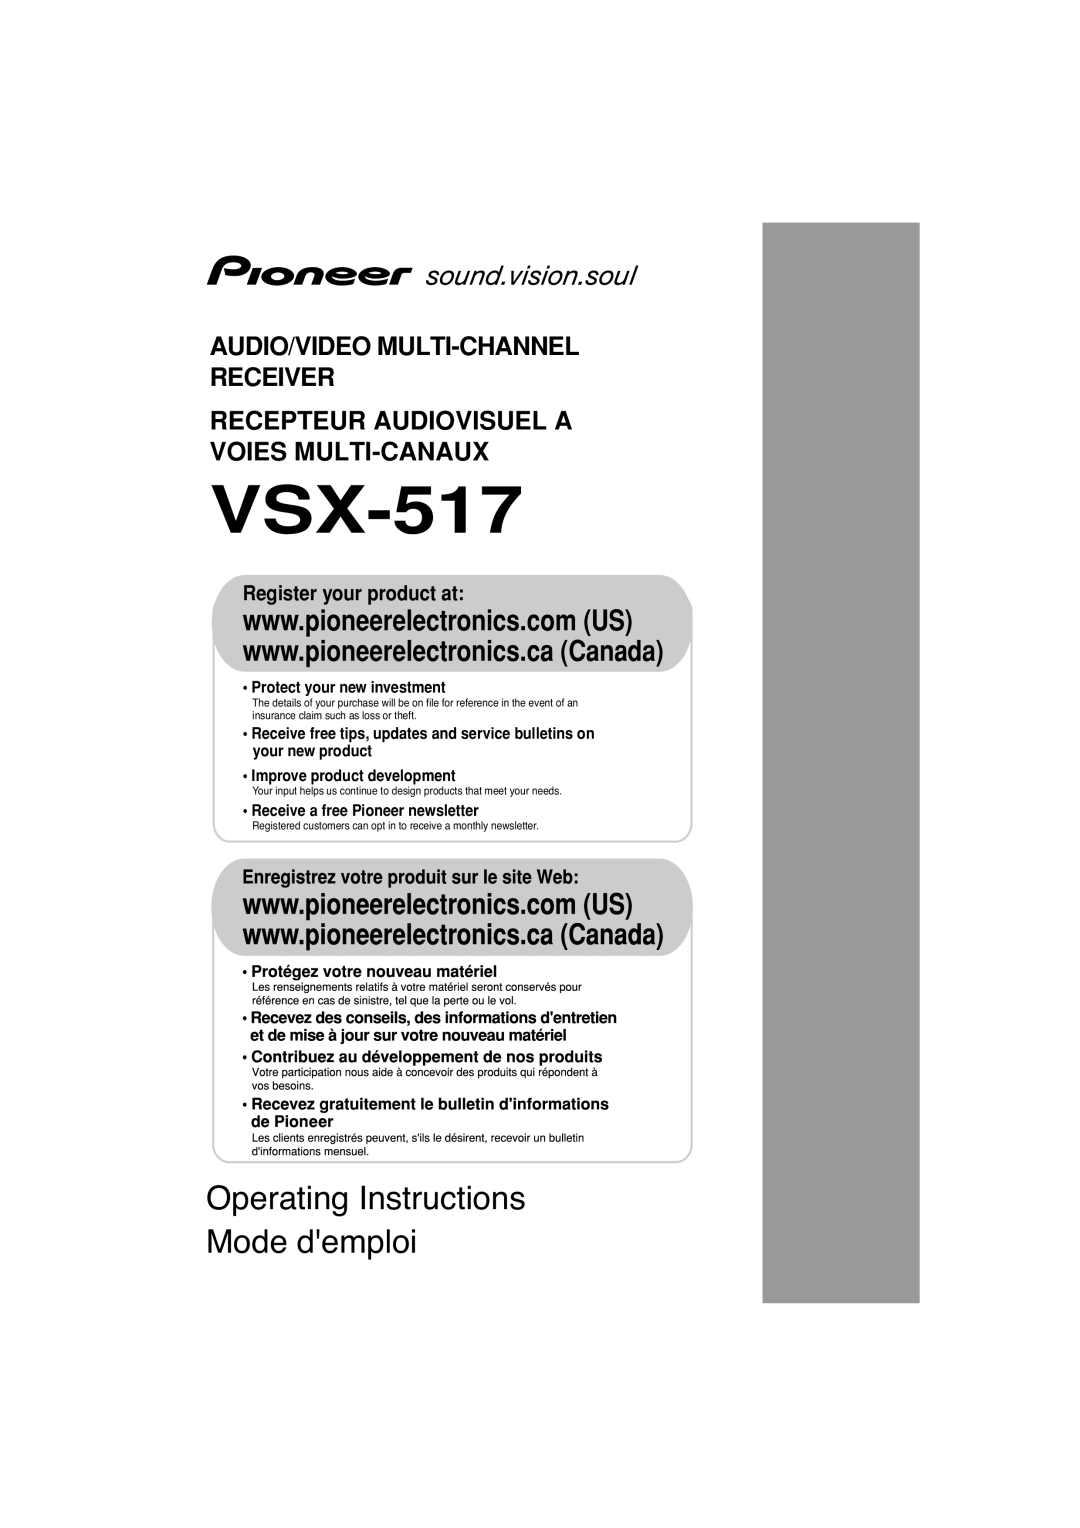 Pioneer XRE3138-A manual VSX-517, Operating Instructions Mode demploi, Audio/Video Multi-Channel Receiver 